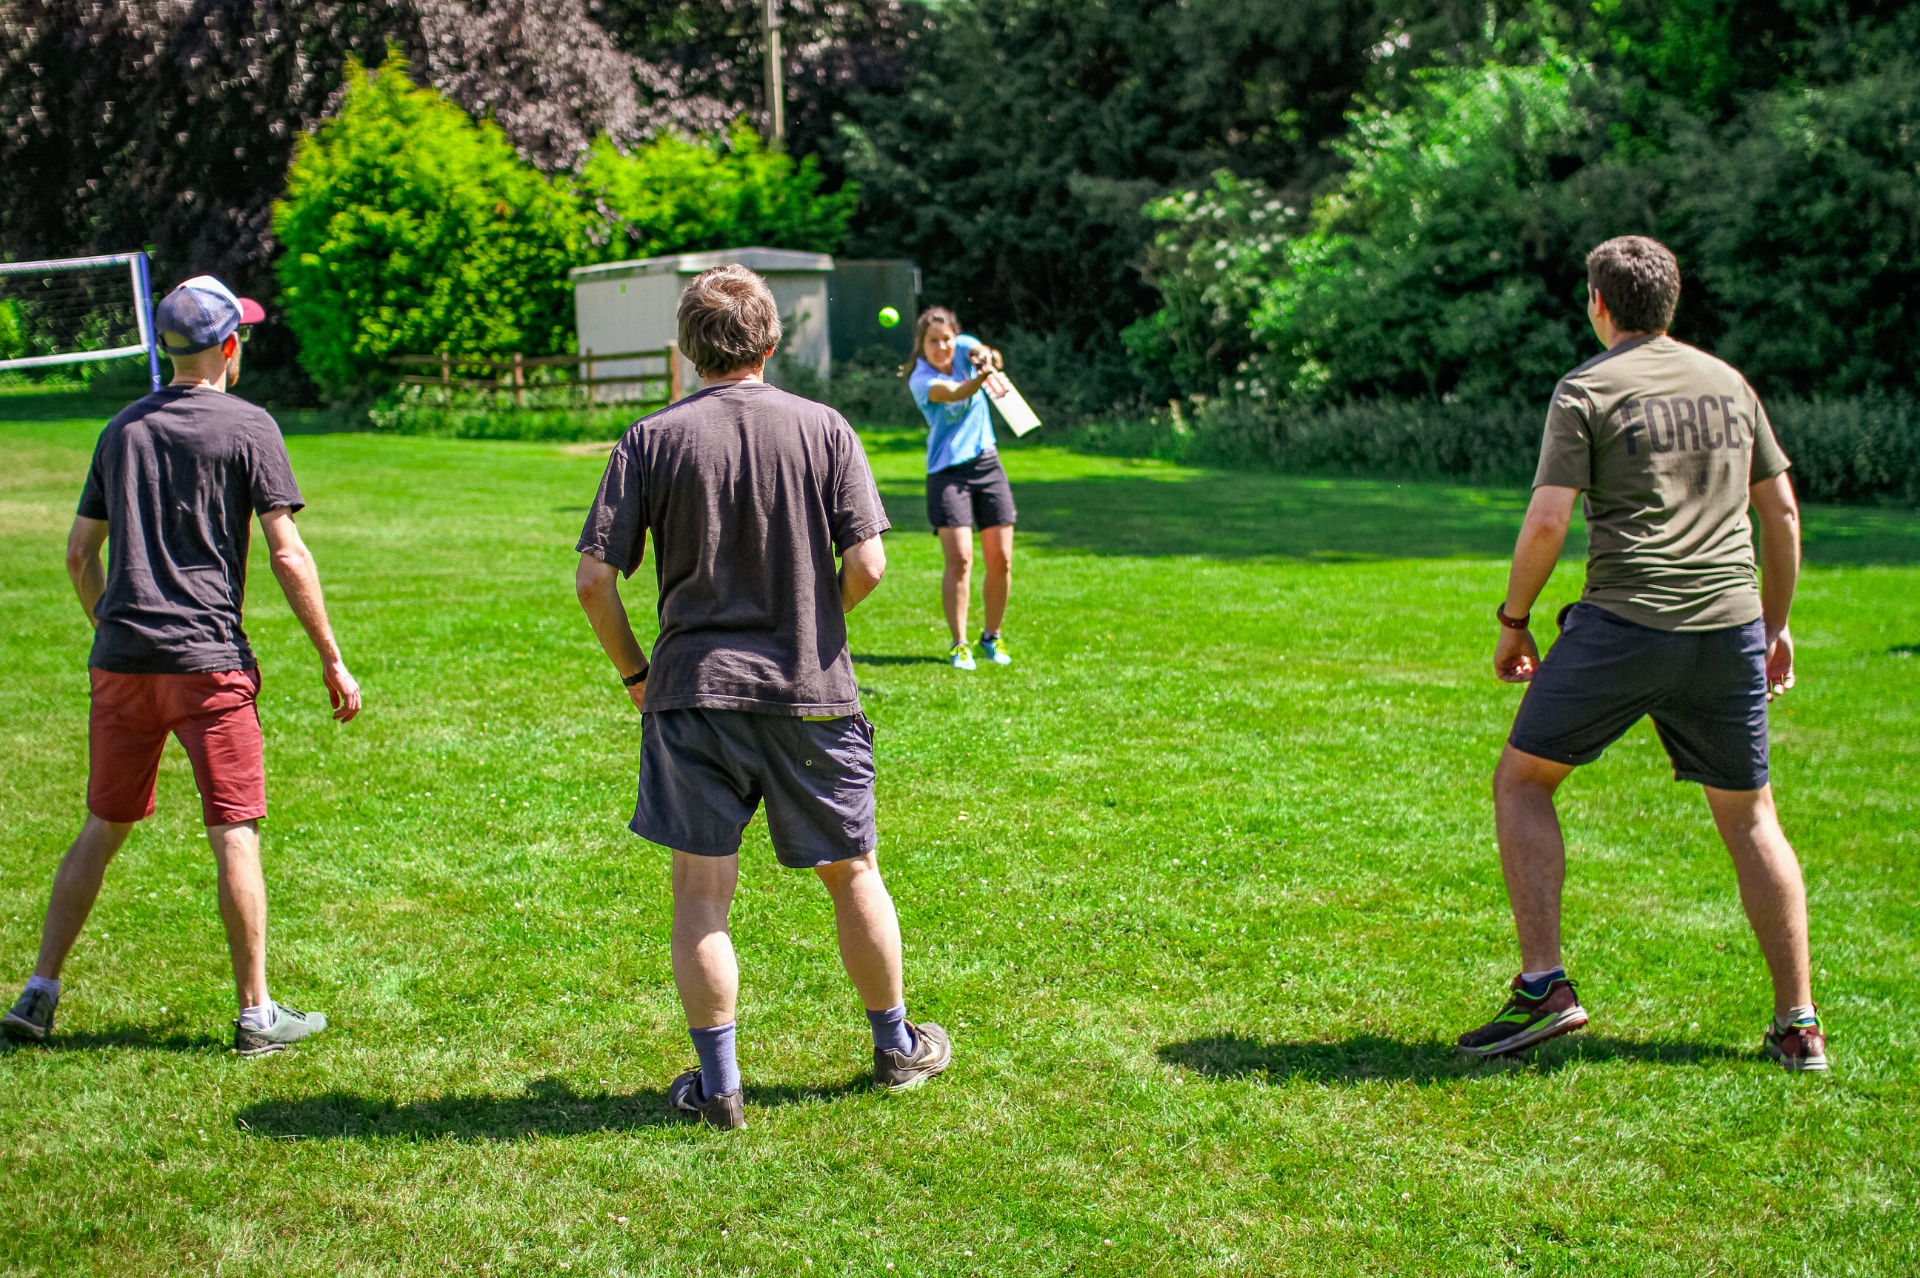 Group of people playing French cricket in a green field surrounded by green trees